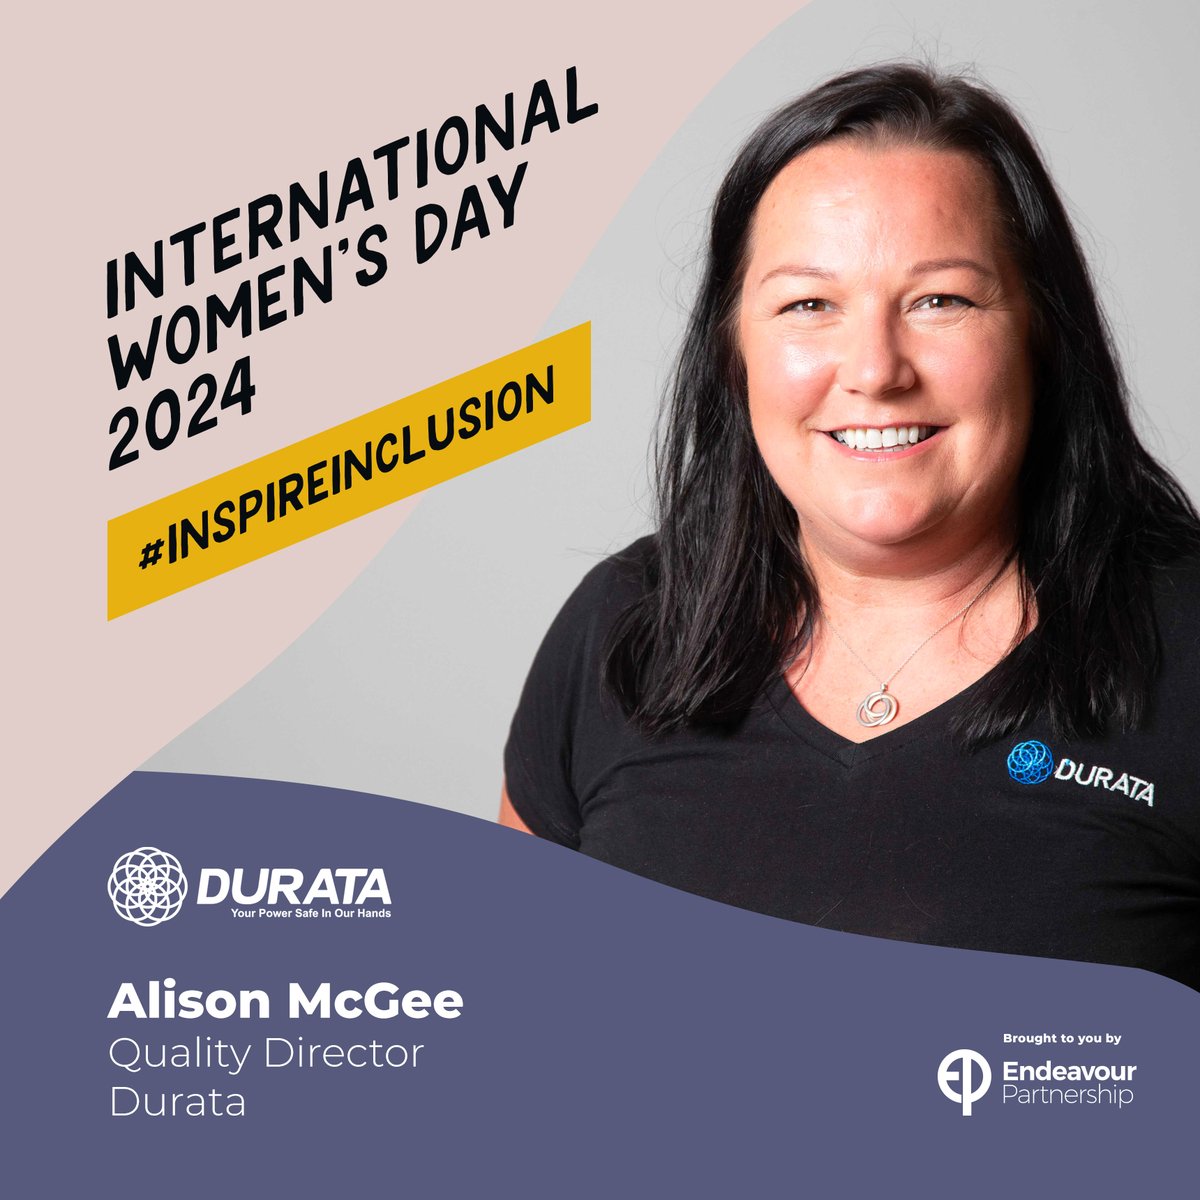 Welcome our second International Women's Day speaker, Alison McGee from @DurataUK Alison will be joining us on Wednesday 6th March at this year's celebration, hosted by @WynyardHall Register for your tickets below, over 75% have now sold. eventbrite.co.uk/e/internationa…